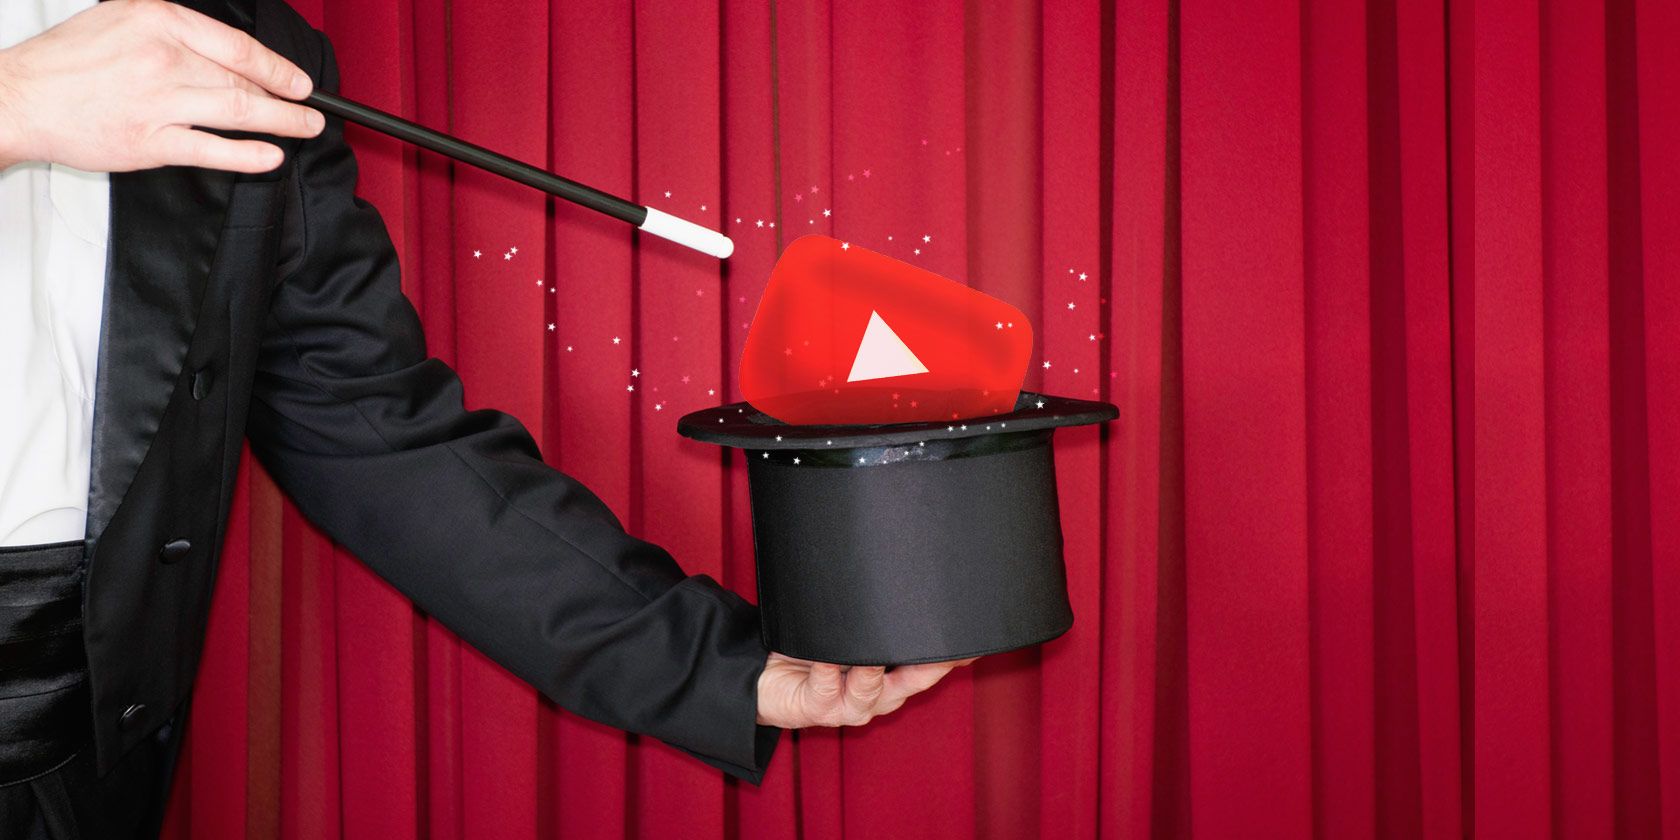 Magician holding a wand over a hat containing the YouTube logo